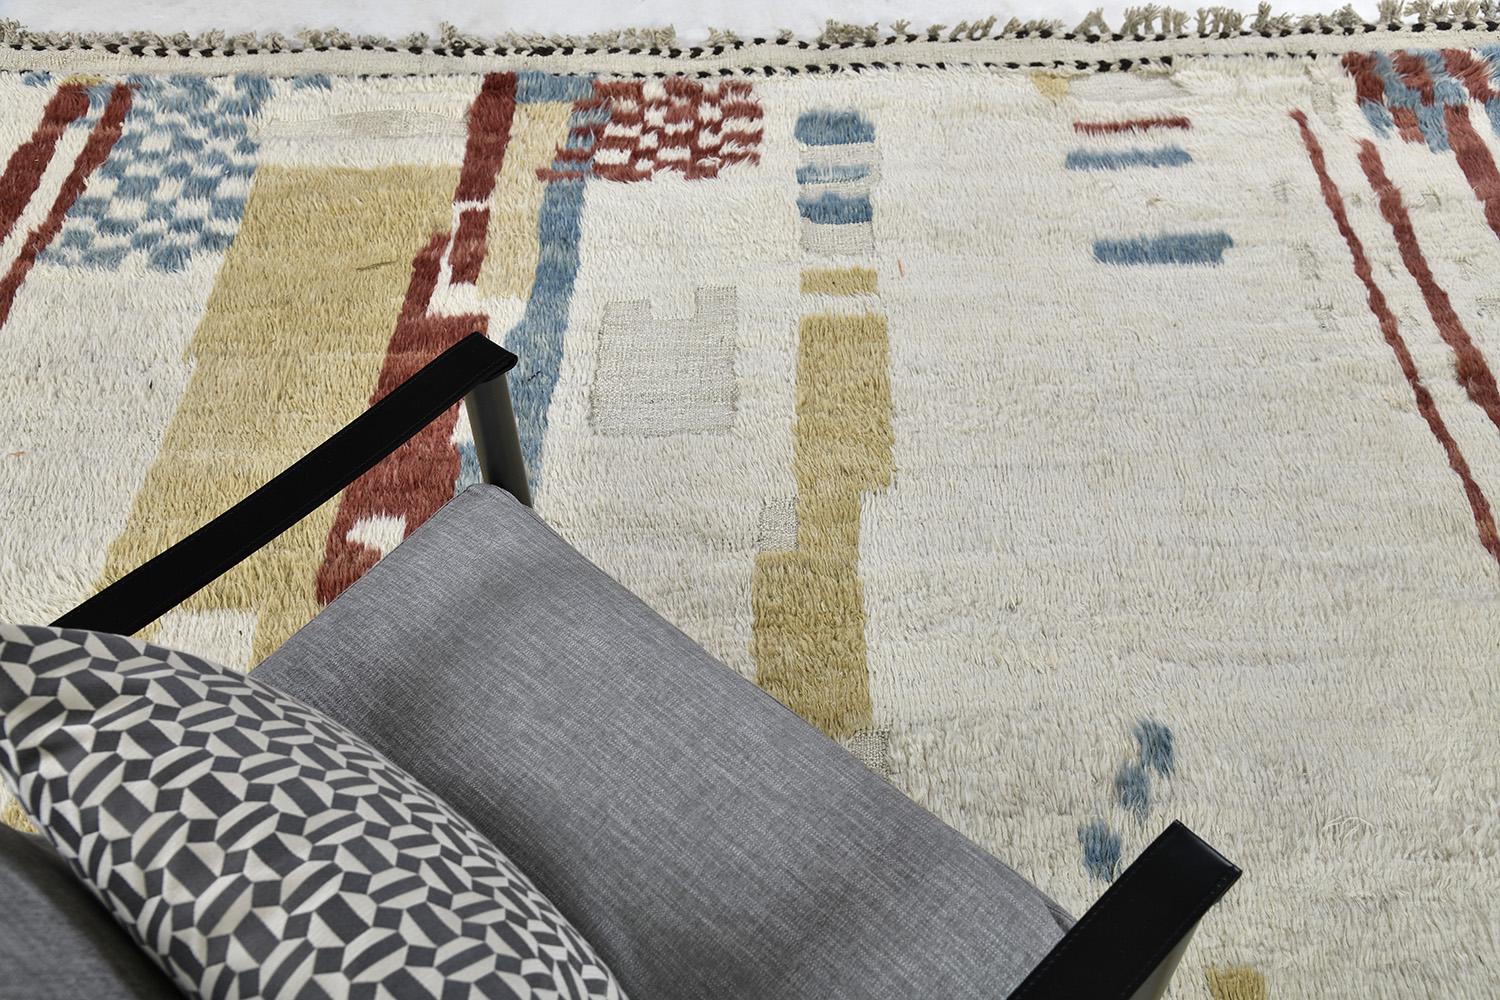 Nakhla is a natural earth-toned rug and a modern interpretation of the Moroccan world. These rugs irregular checkered of red and blue, khaki, and salt and pepper strokes an off-white field resemble the fibers of nature and their ability to be used